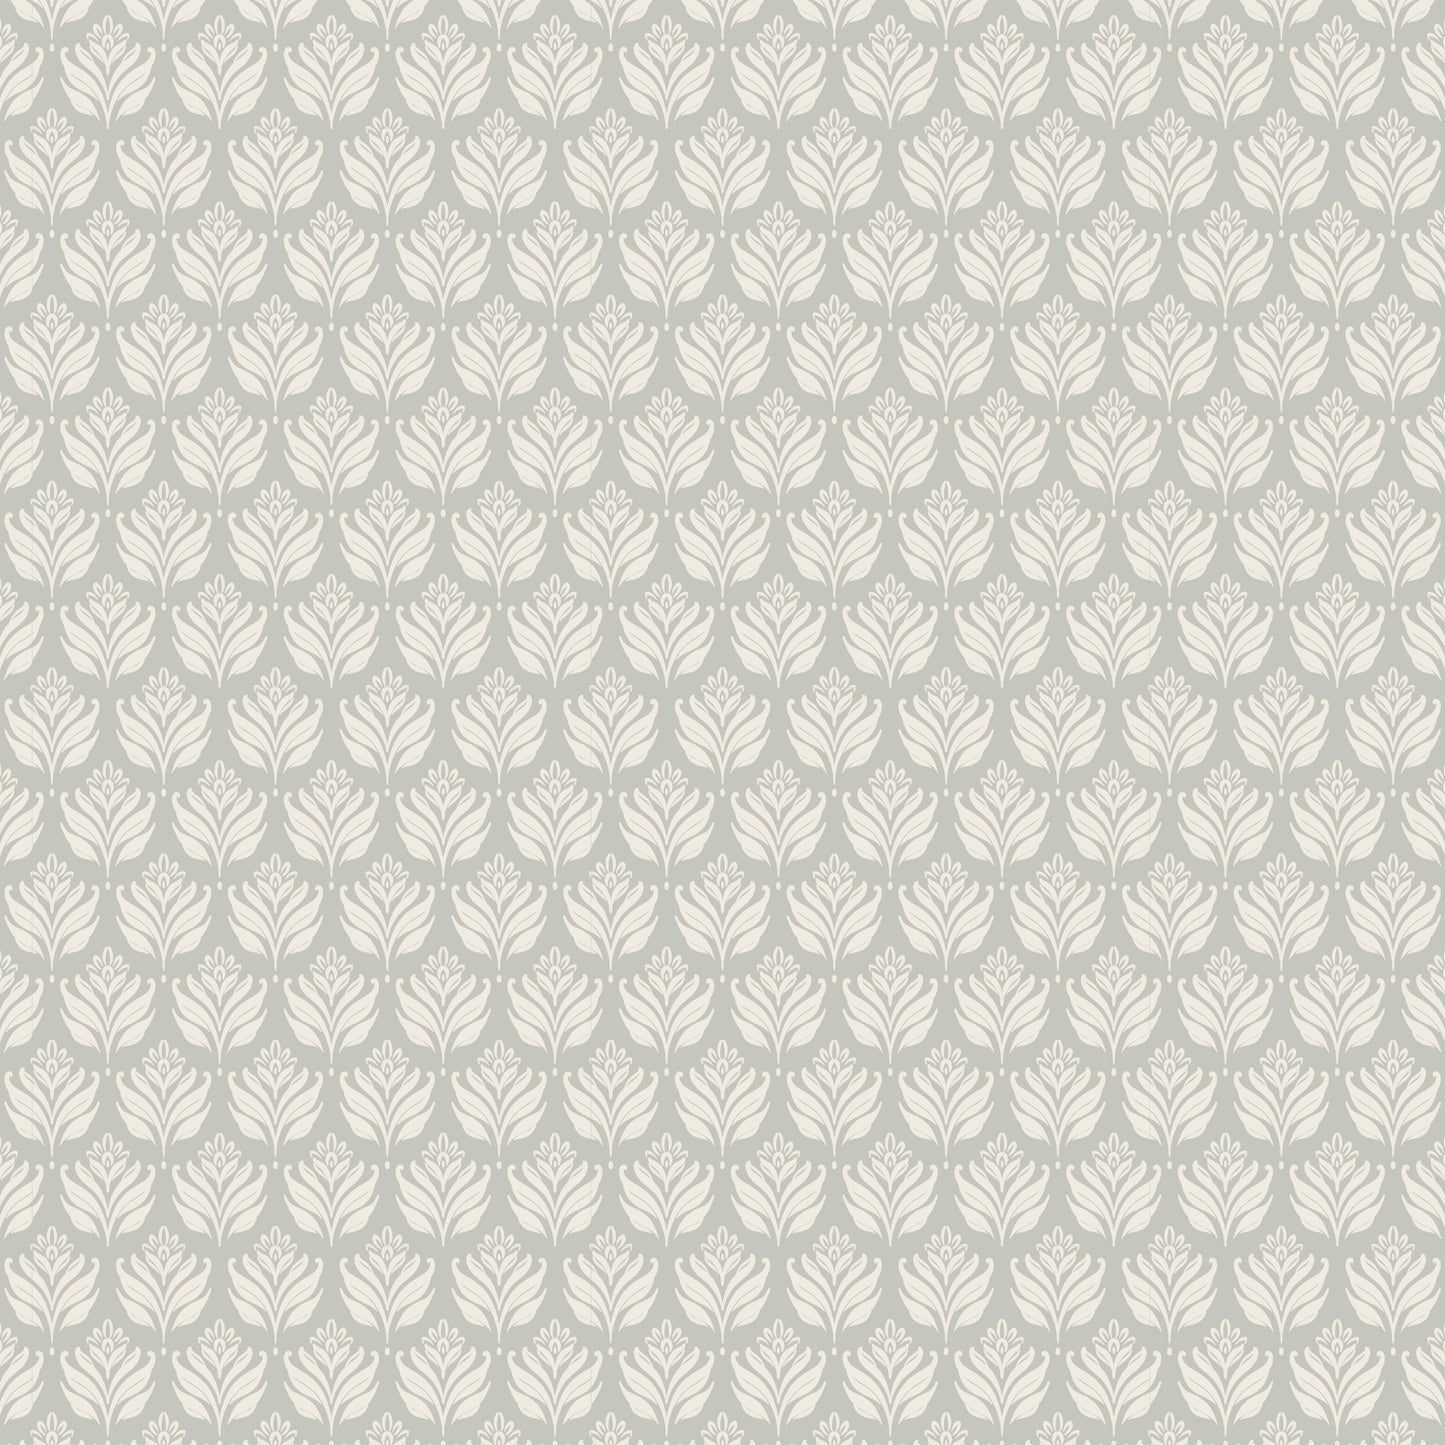 Introducing our Elegant Leaves Wallpaper in Sand. These subtle leaves add a touch of sophistication to any space. Elevate your room with our premium wallpaper, designed for those with refined taste.